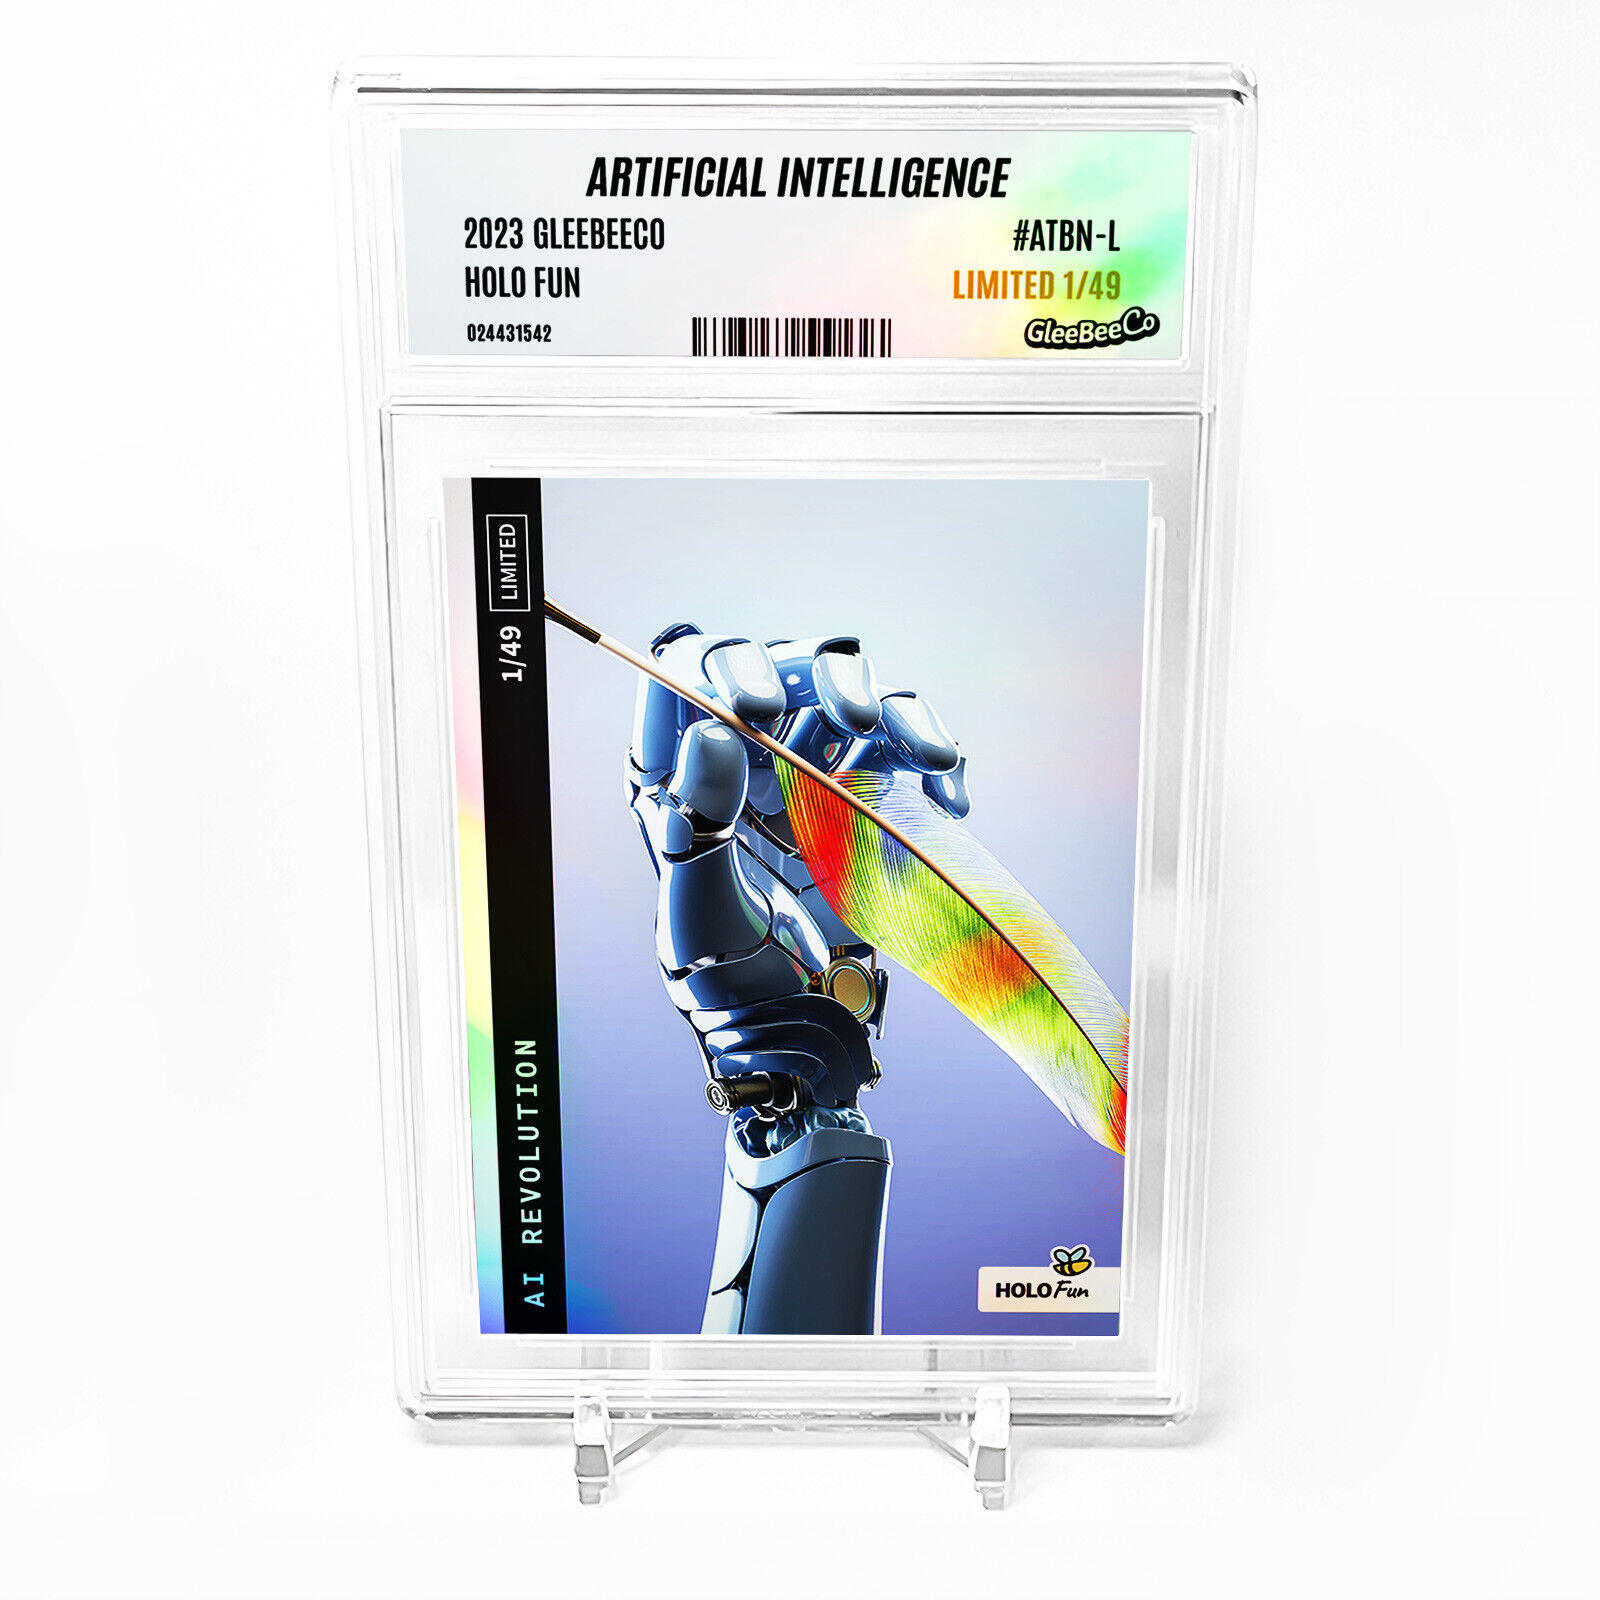 ARTIFICIAL INTELLIGENCE Card 2023 GleeBeeCo Holo Fun #ATBN-L Limited to Only /49